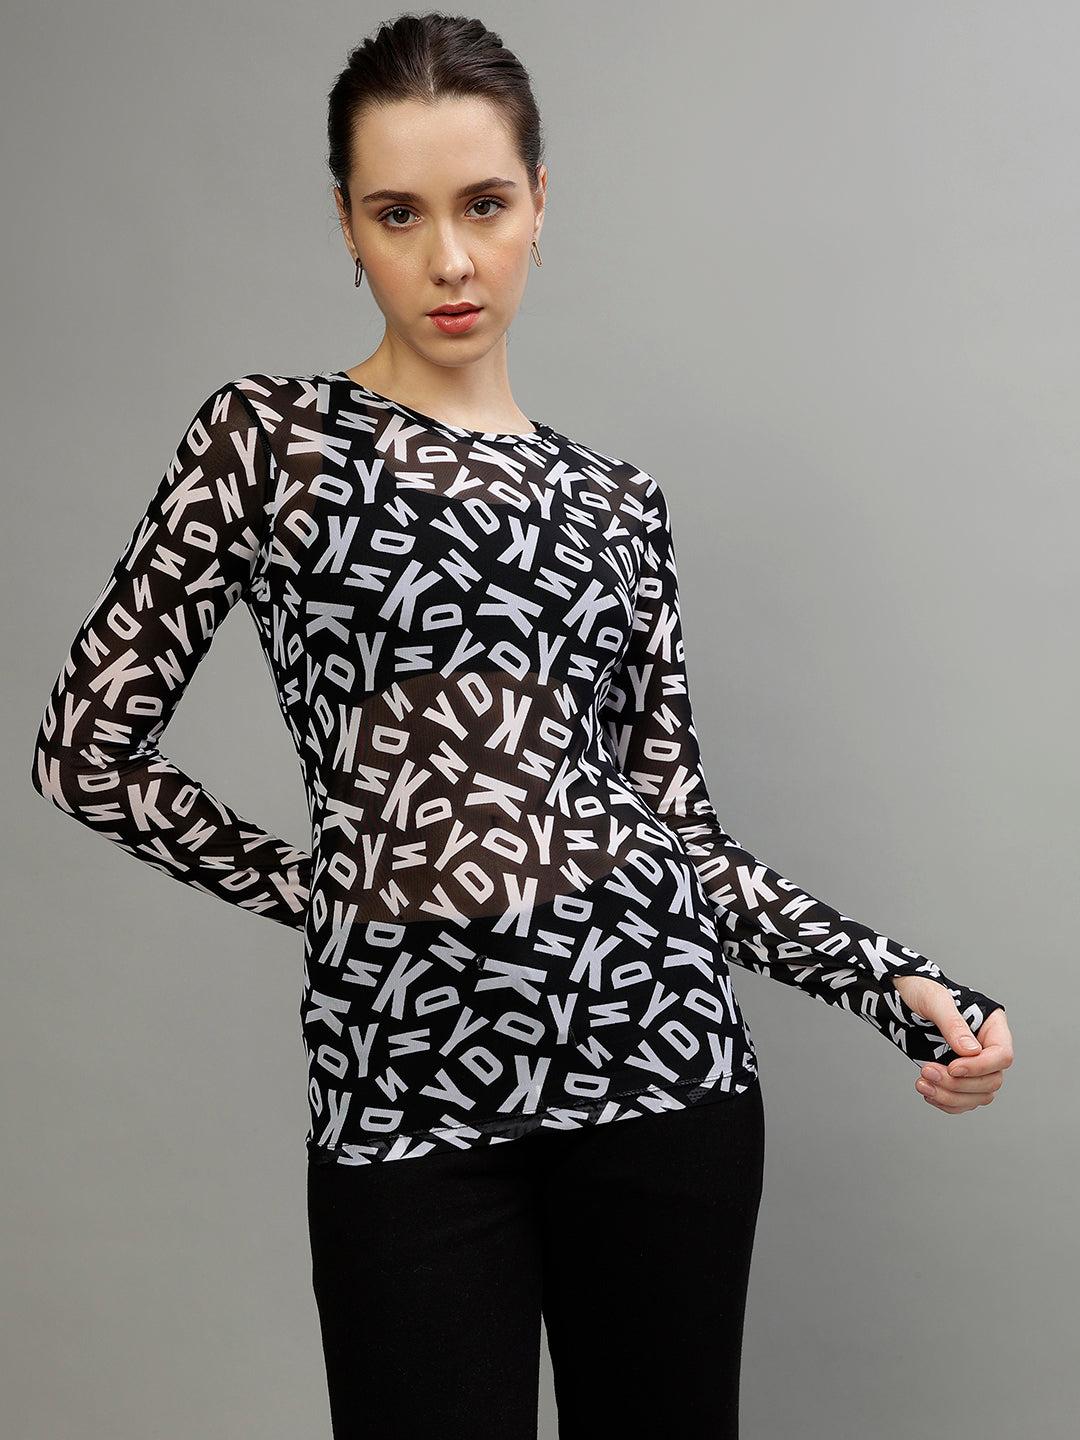 Dkny Women Printed Round Neck Full Sleeves Top